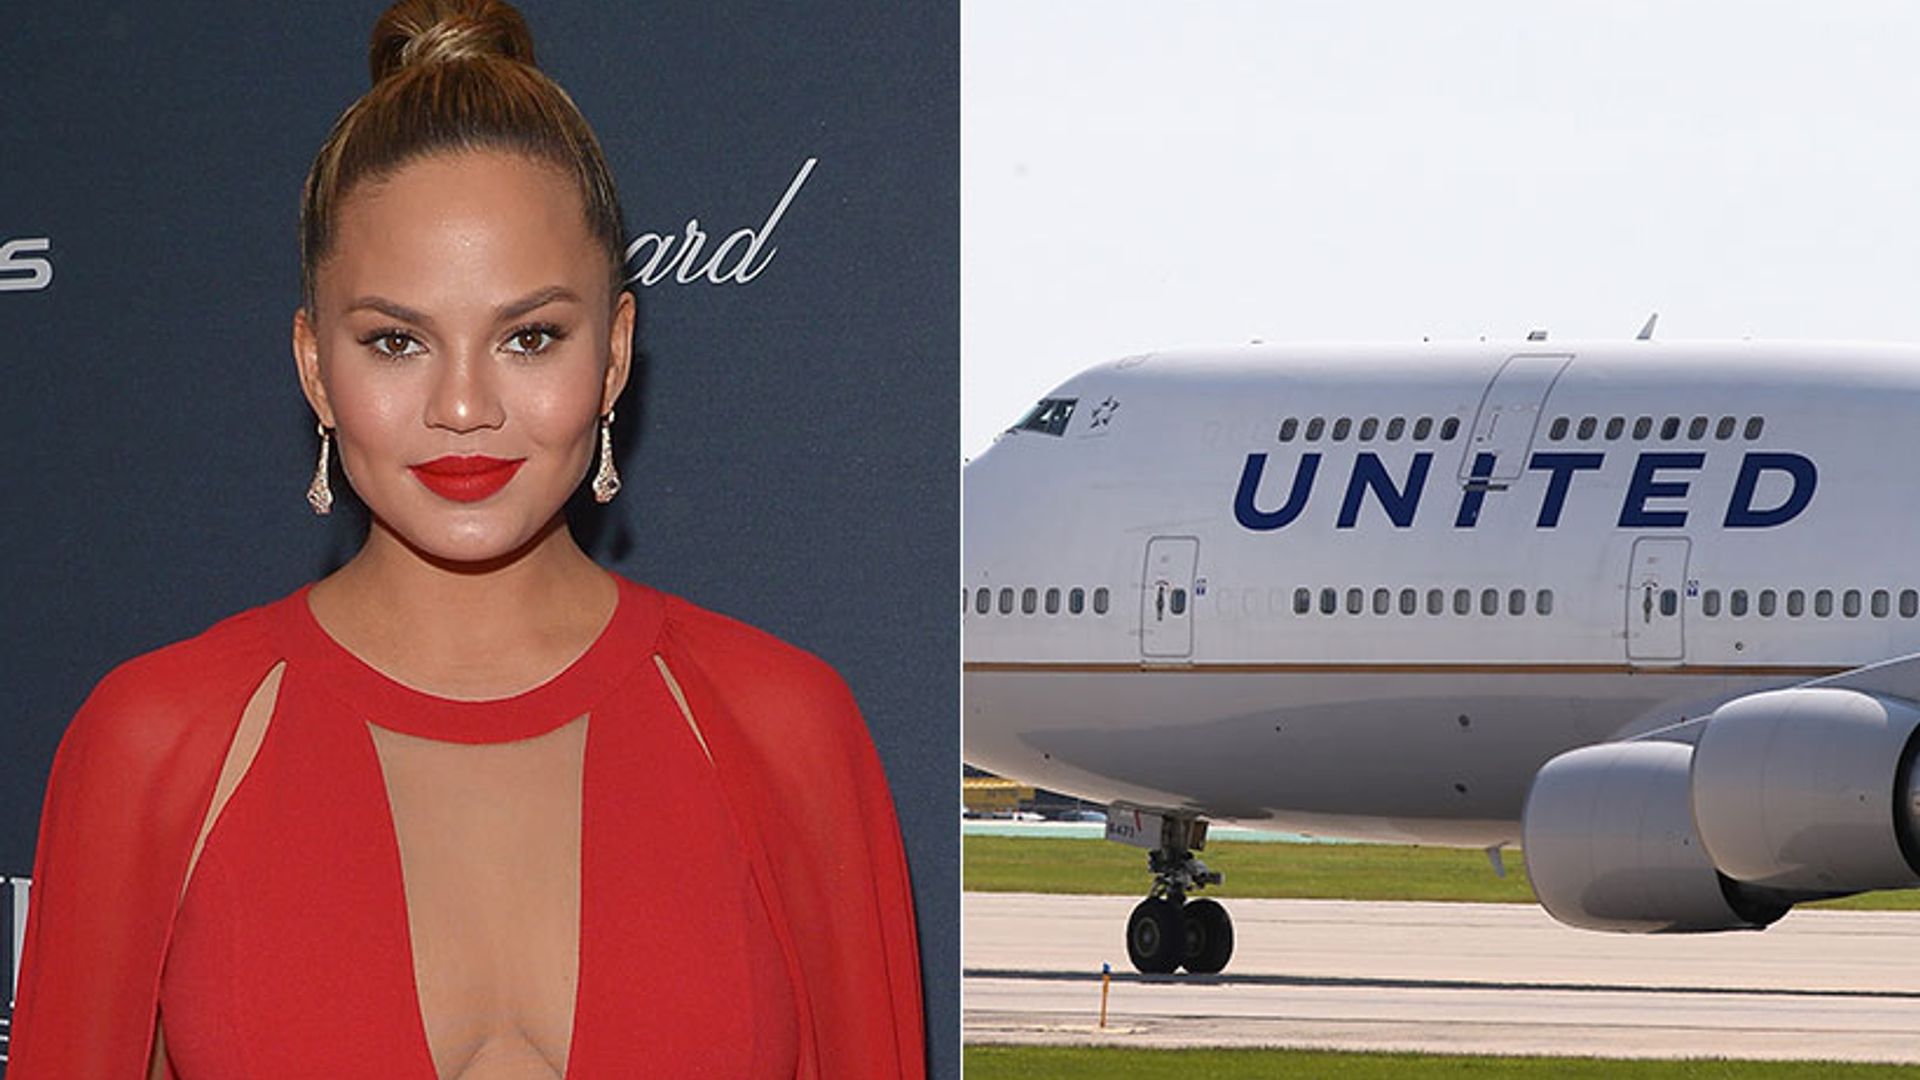 Stars react to United Airlines kicking off passengers for wearing leggings